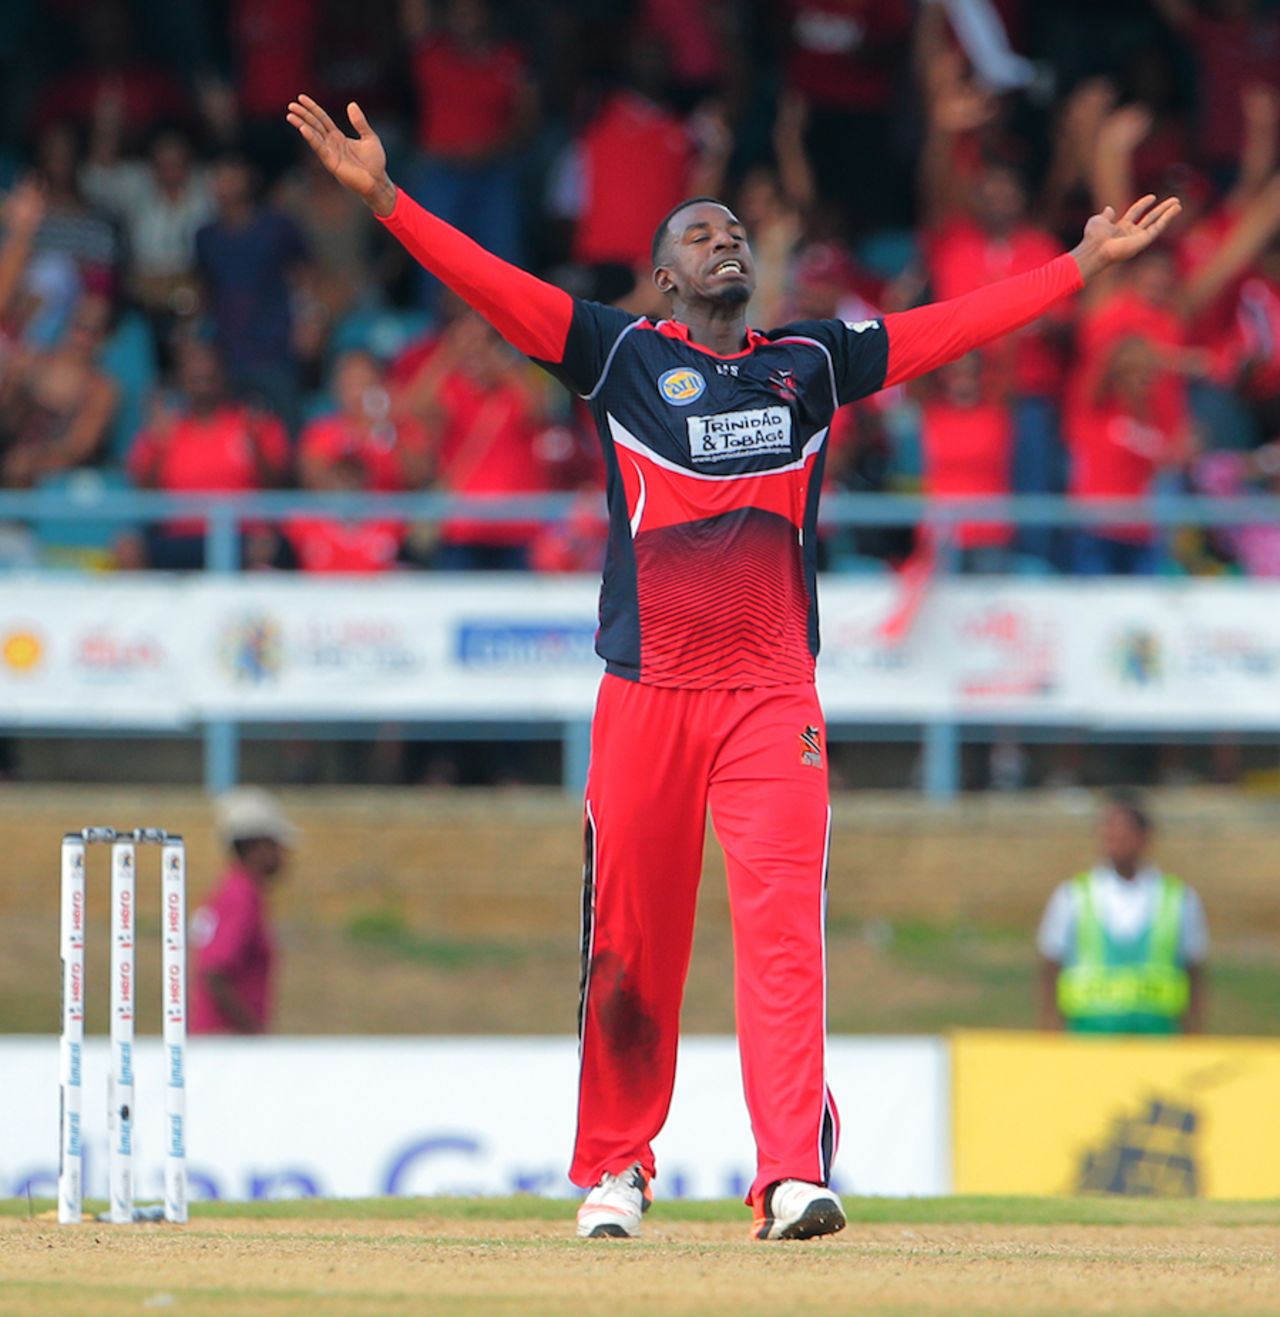 Derone Davis celebrates one of his three wickets, Trinidad & Tobago Red Steel v St Kitts and Nevis Patriots, CPL 2015, Port-of-Spain, July 18, 2015